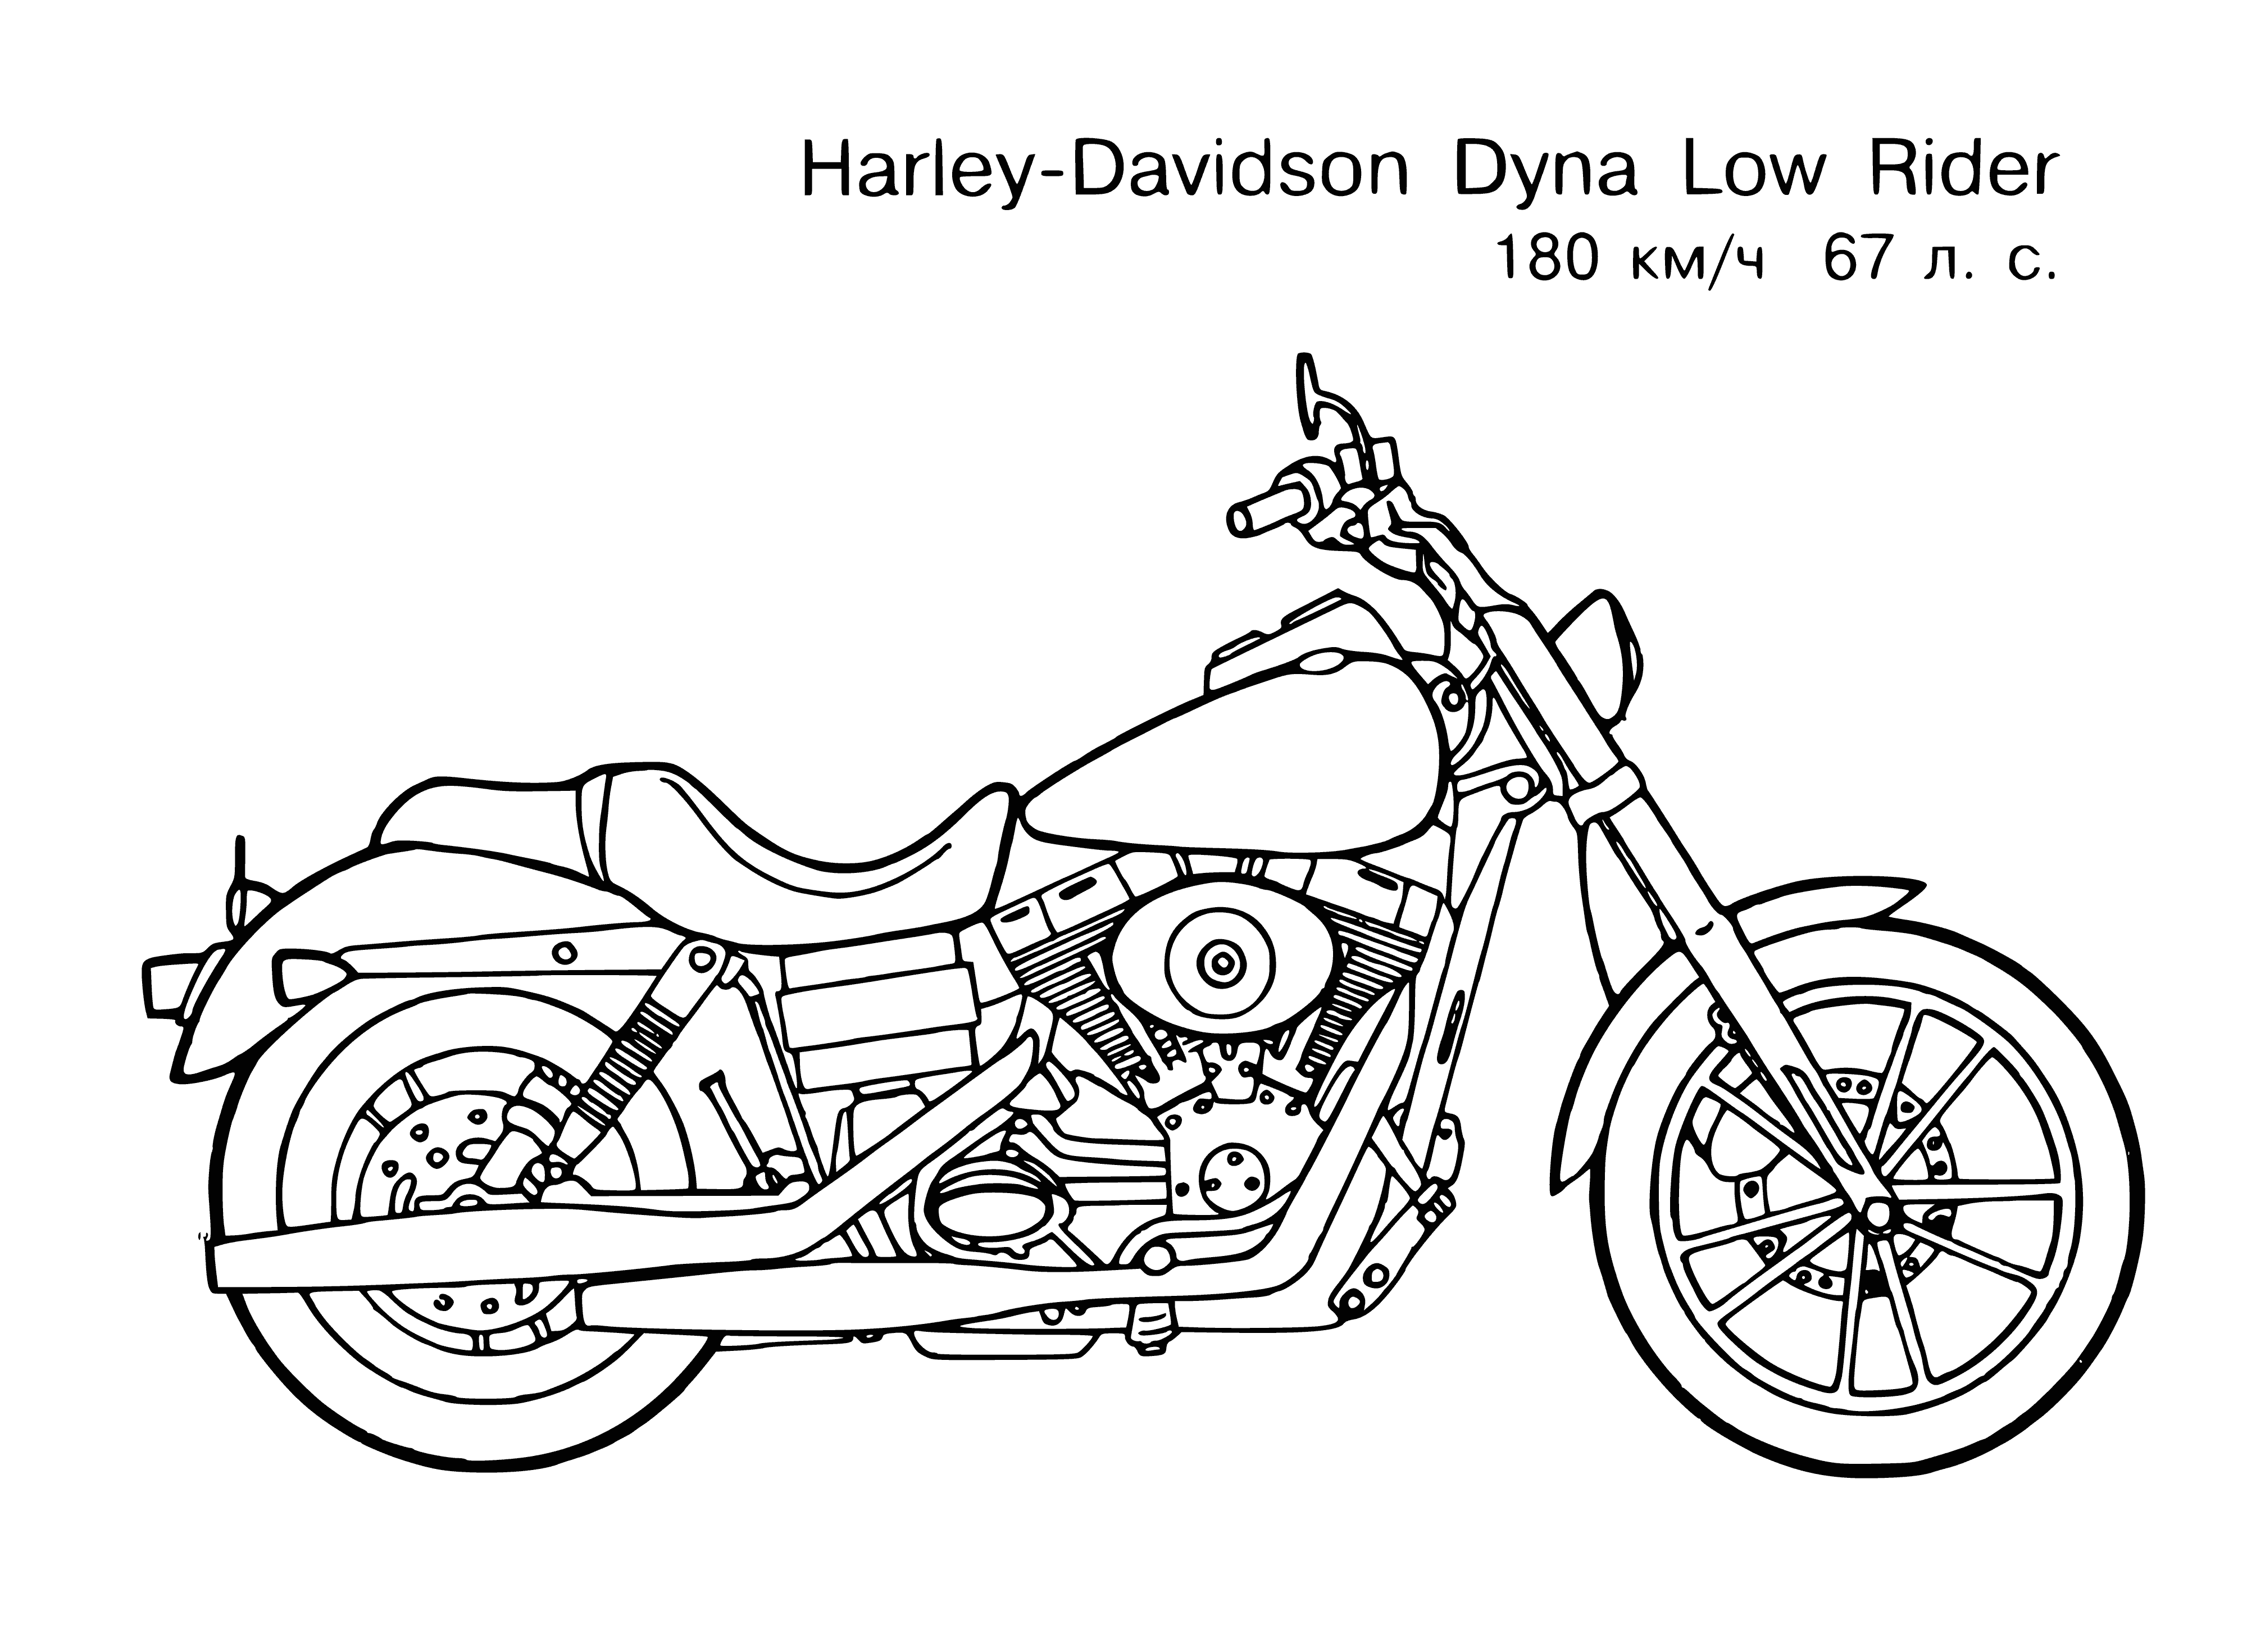 coloring page: Motorcycle parked on a road w/person looking at it; day, front wheel turned left; background blurry. #bluemotorcycle #daytime #blurry